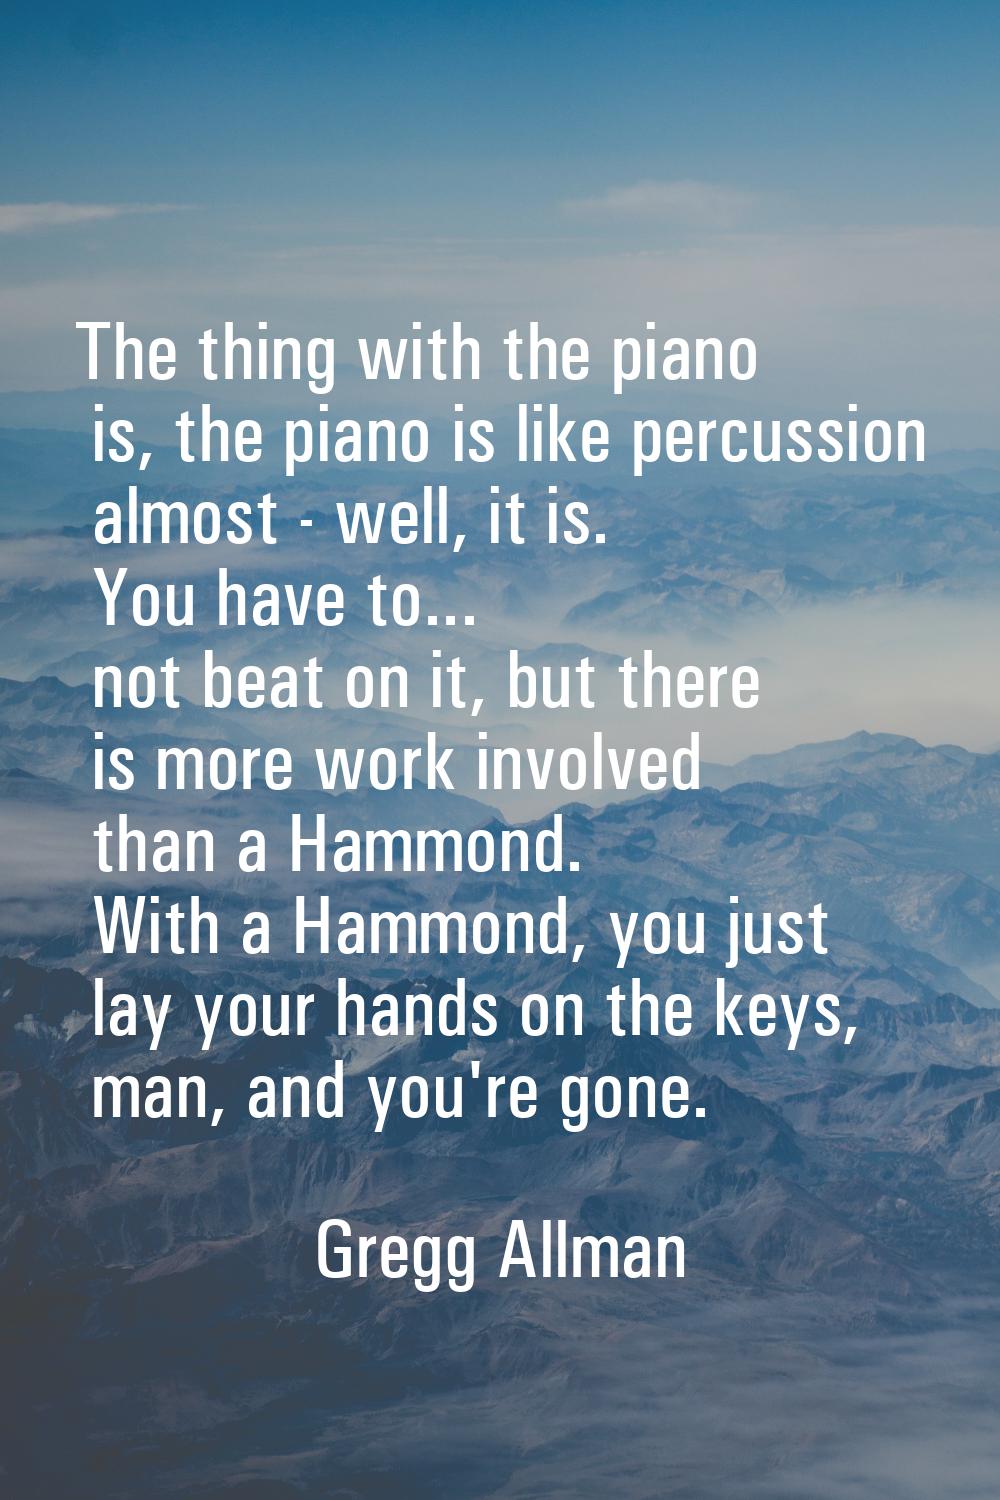 The thing with the piano is, the piano is like percussion almost - well, it is. You have to... not 